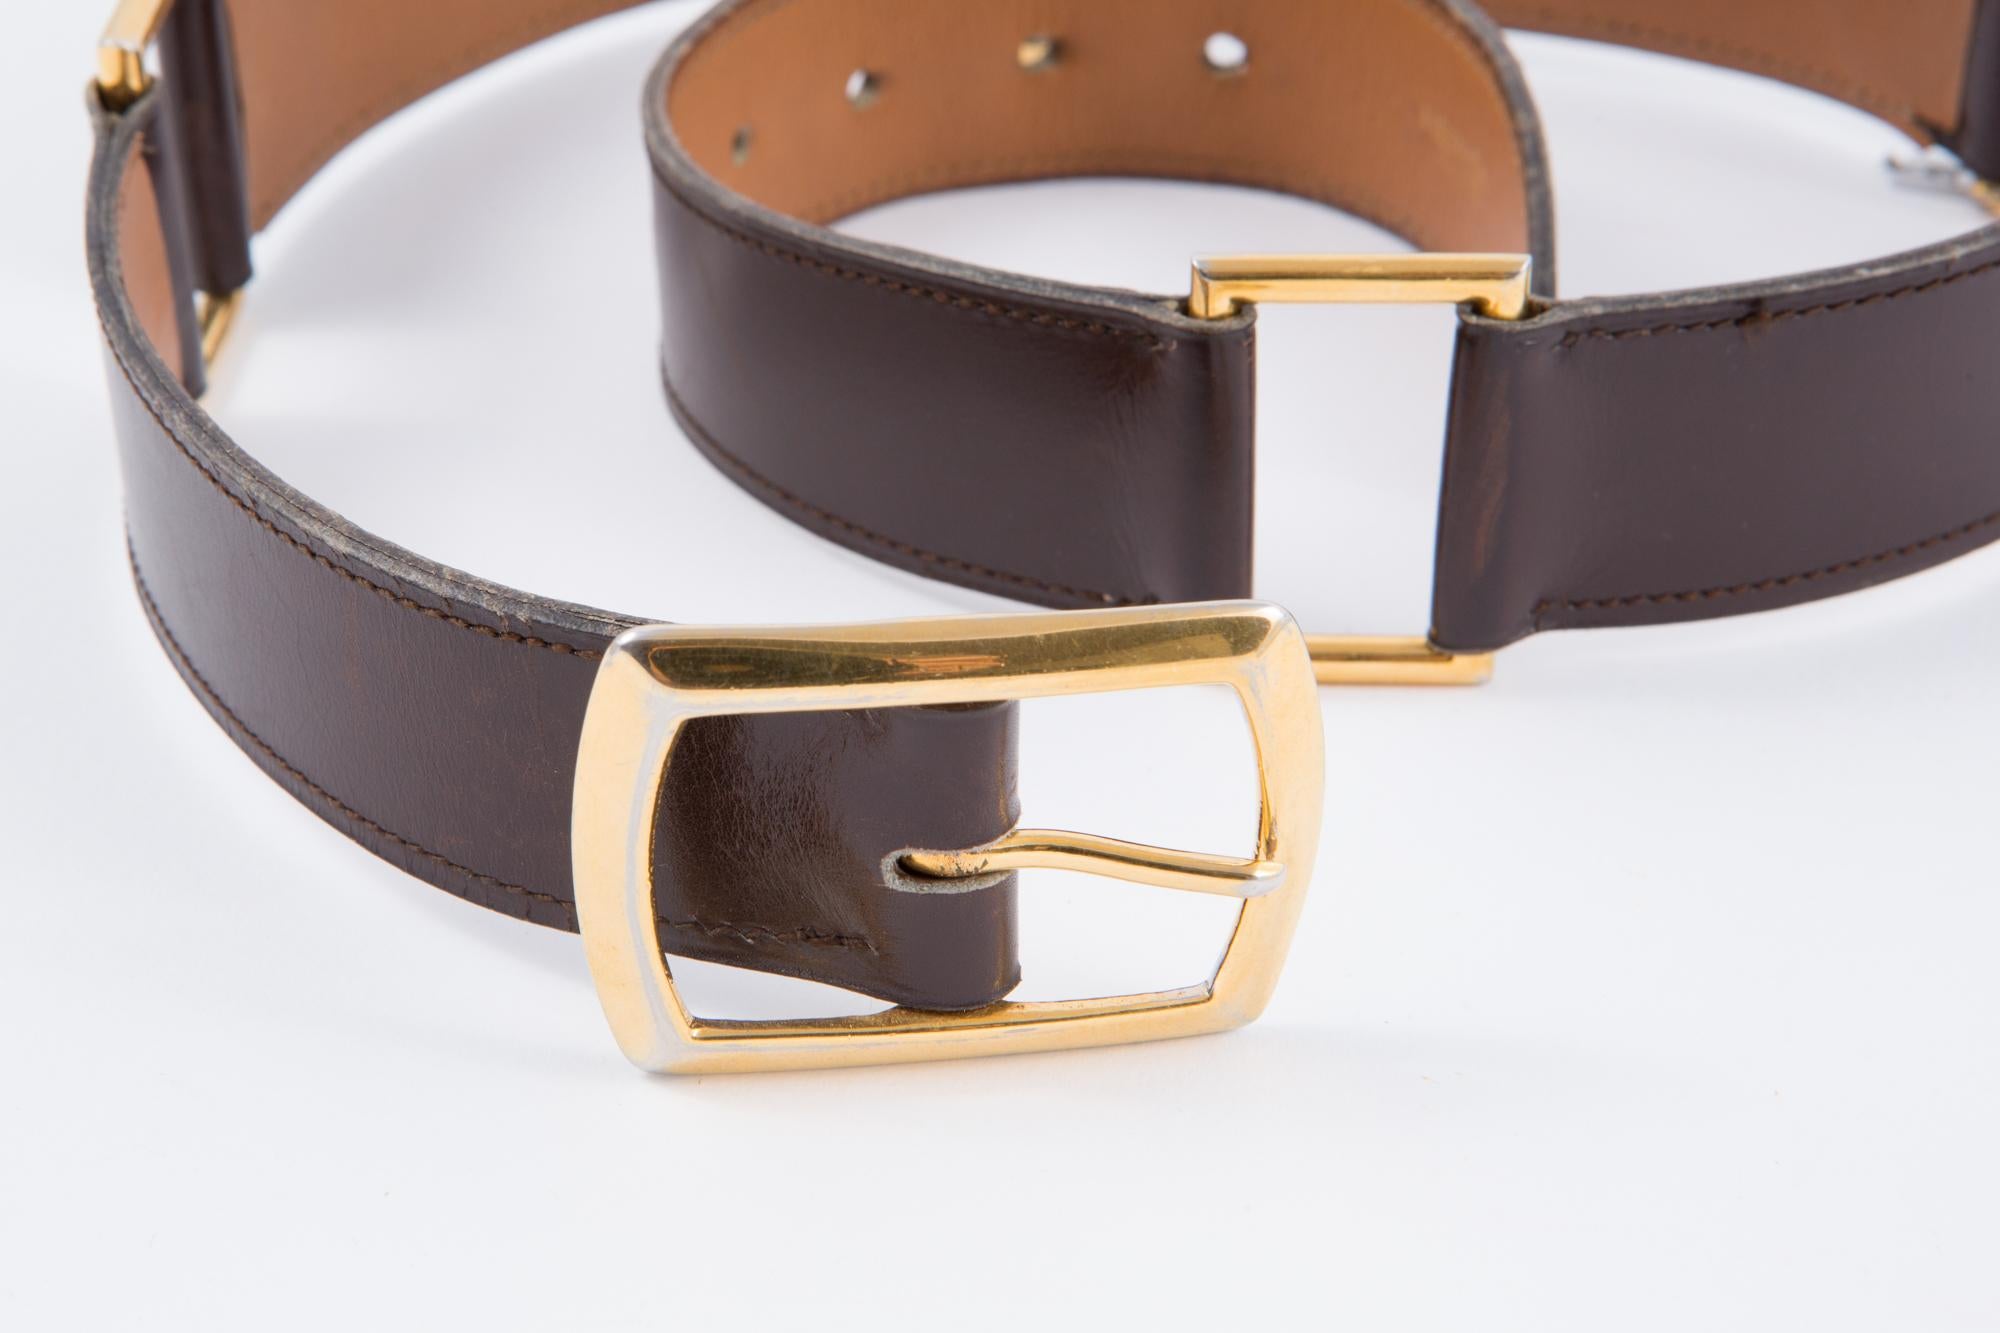 Gorgeous brown lamb box leather Hermès belt featuring plated gold hook buckle, and plated gold details,  and an inside gold tone HERMES Paris stamp
Length: 31.8in. (81 cm)
Width: 1.18in. (3cm) 
In good vintage condition. Made in France.
Please note